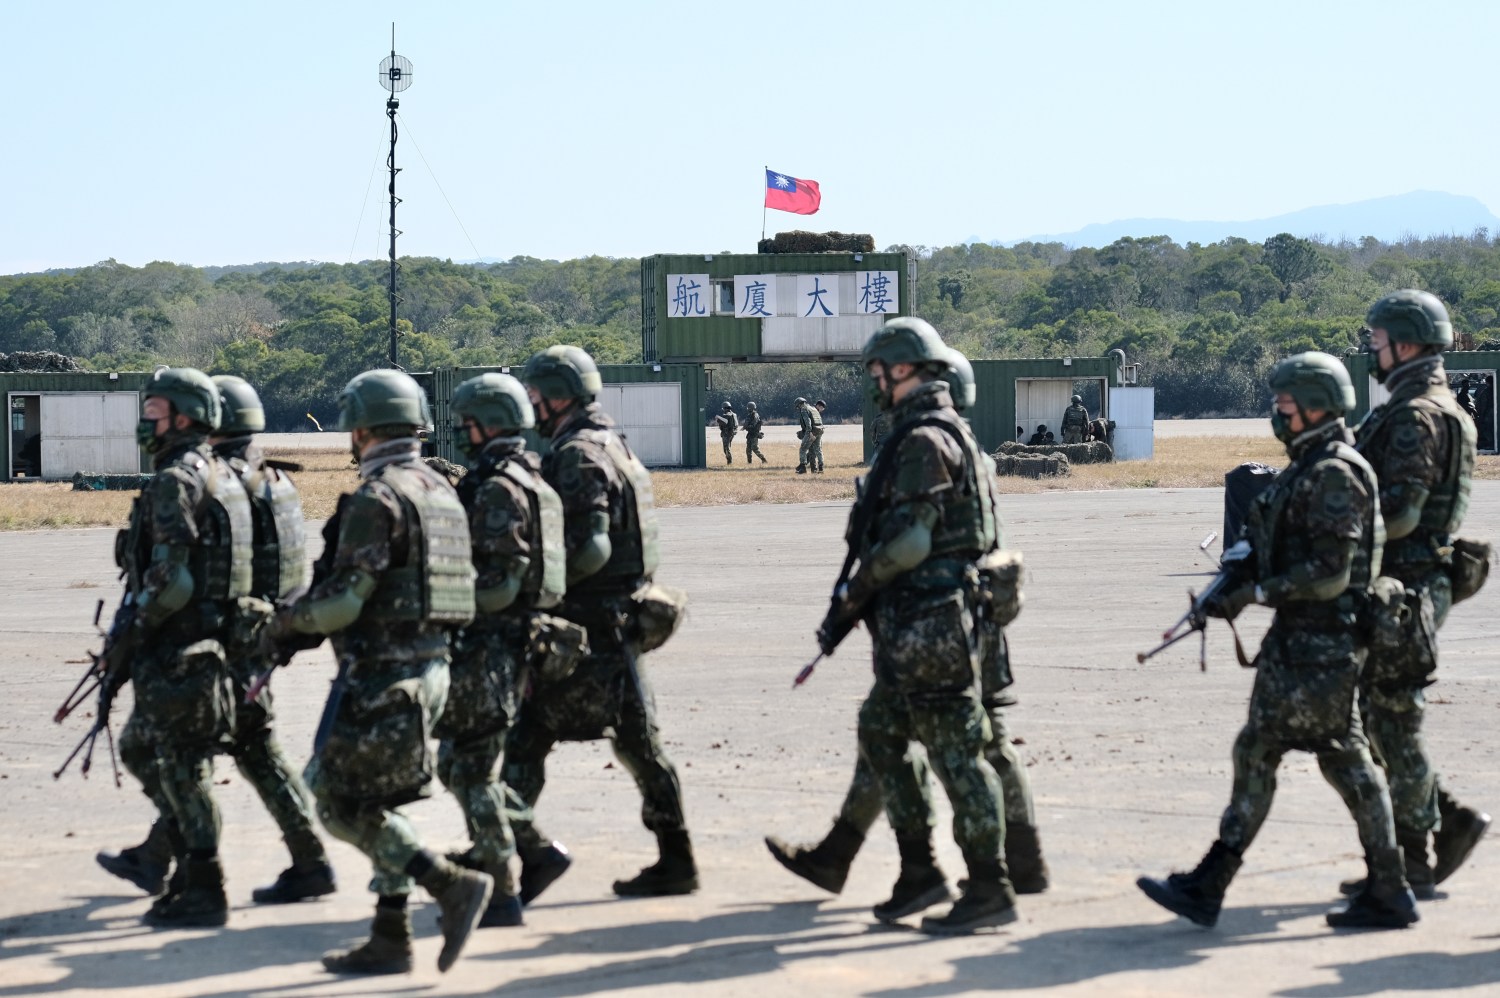 Taiwanese troops seen walking in a military base after the exercise for lunar new year. Hsinshu, Taiwan. January 19, 2021.Troupes taiwanaises vues entrain de marcher dans une base militaire militaire apres l exercice militaire pour le nouvel an lunaire. Hsinshu, Taiwan. 19 janvier 2021.NO USE FRANCE